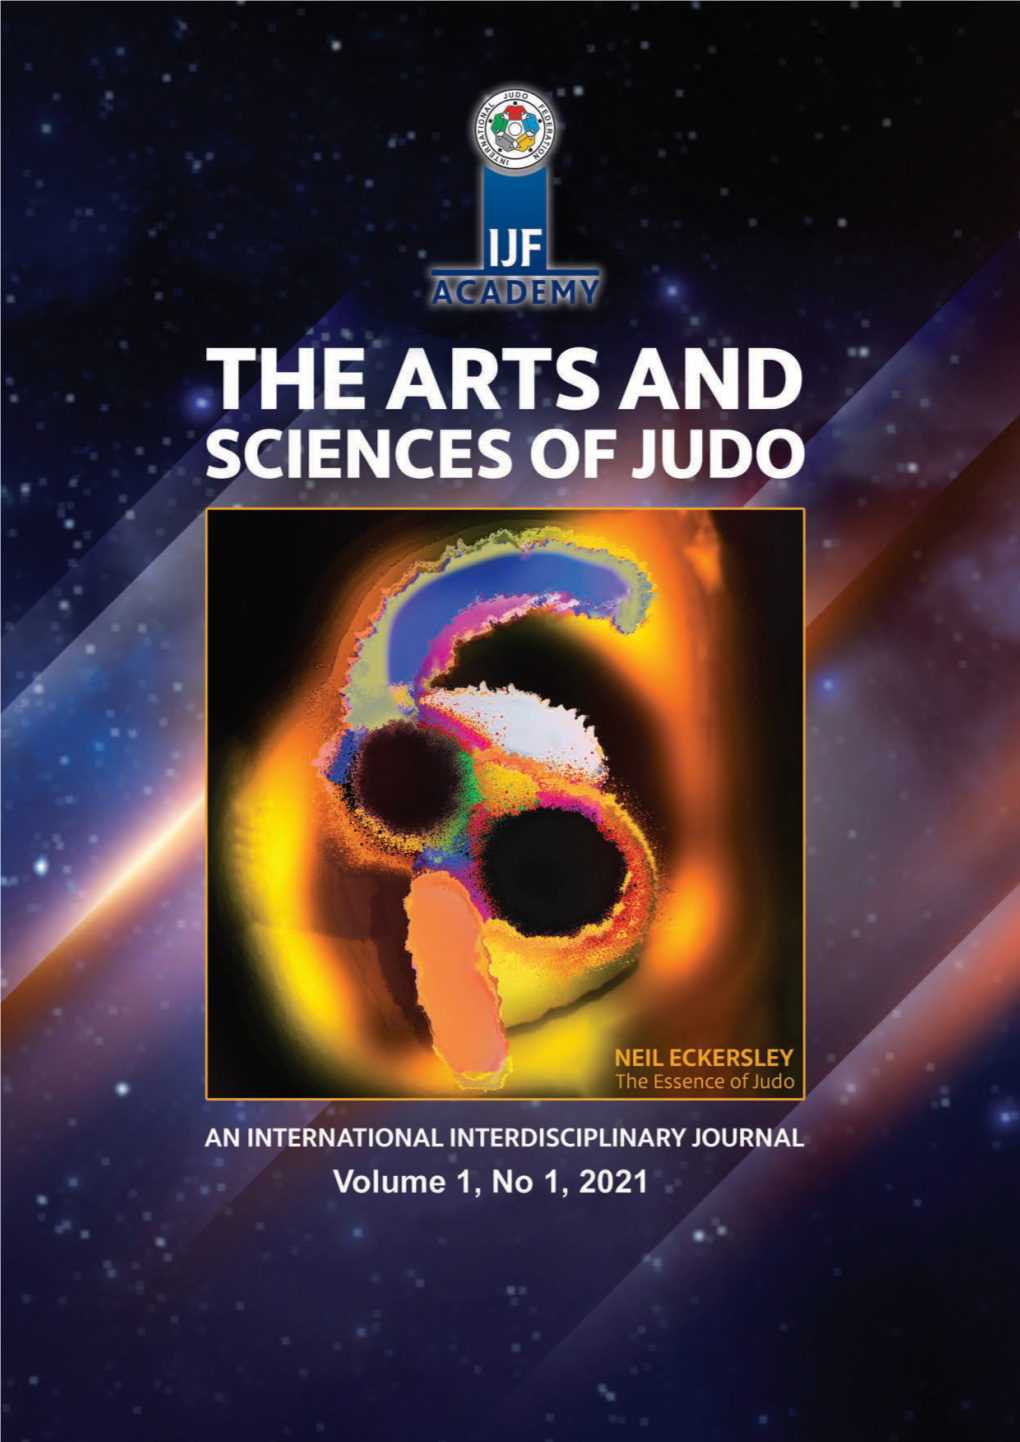 The Arts and Sciences of Judo, Volume 1, No 1, 2021